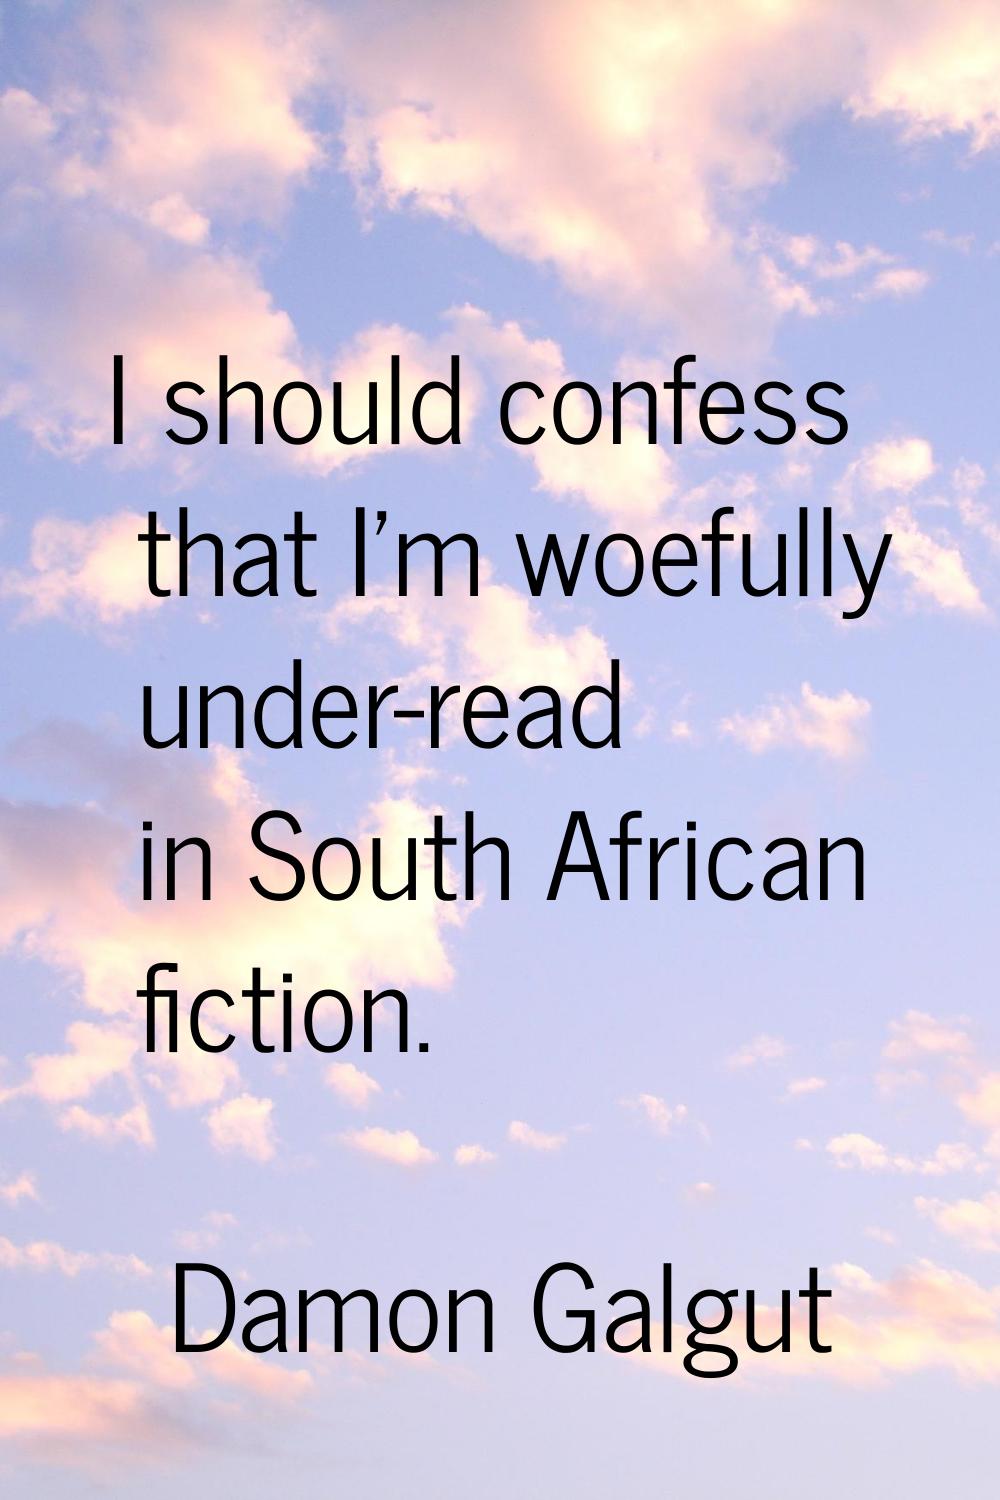 I should confess that I'm woefully under-read in South African fiction.